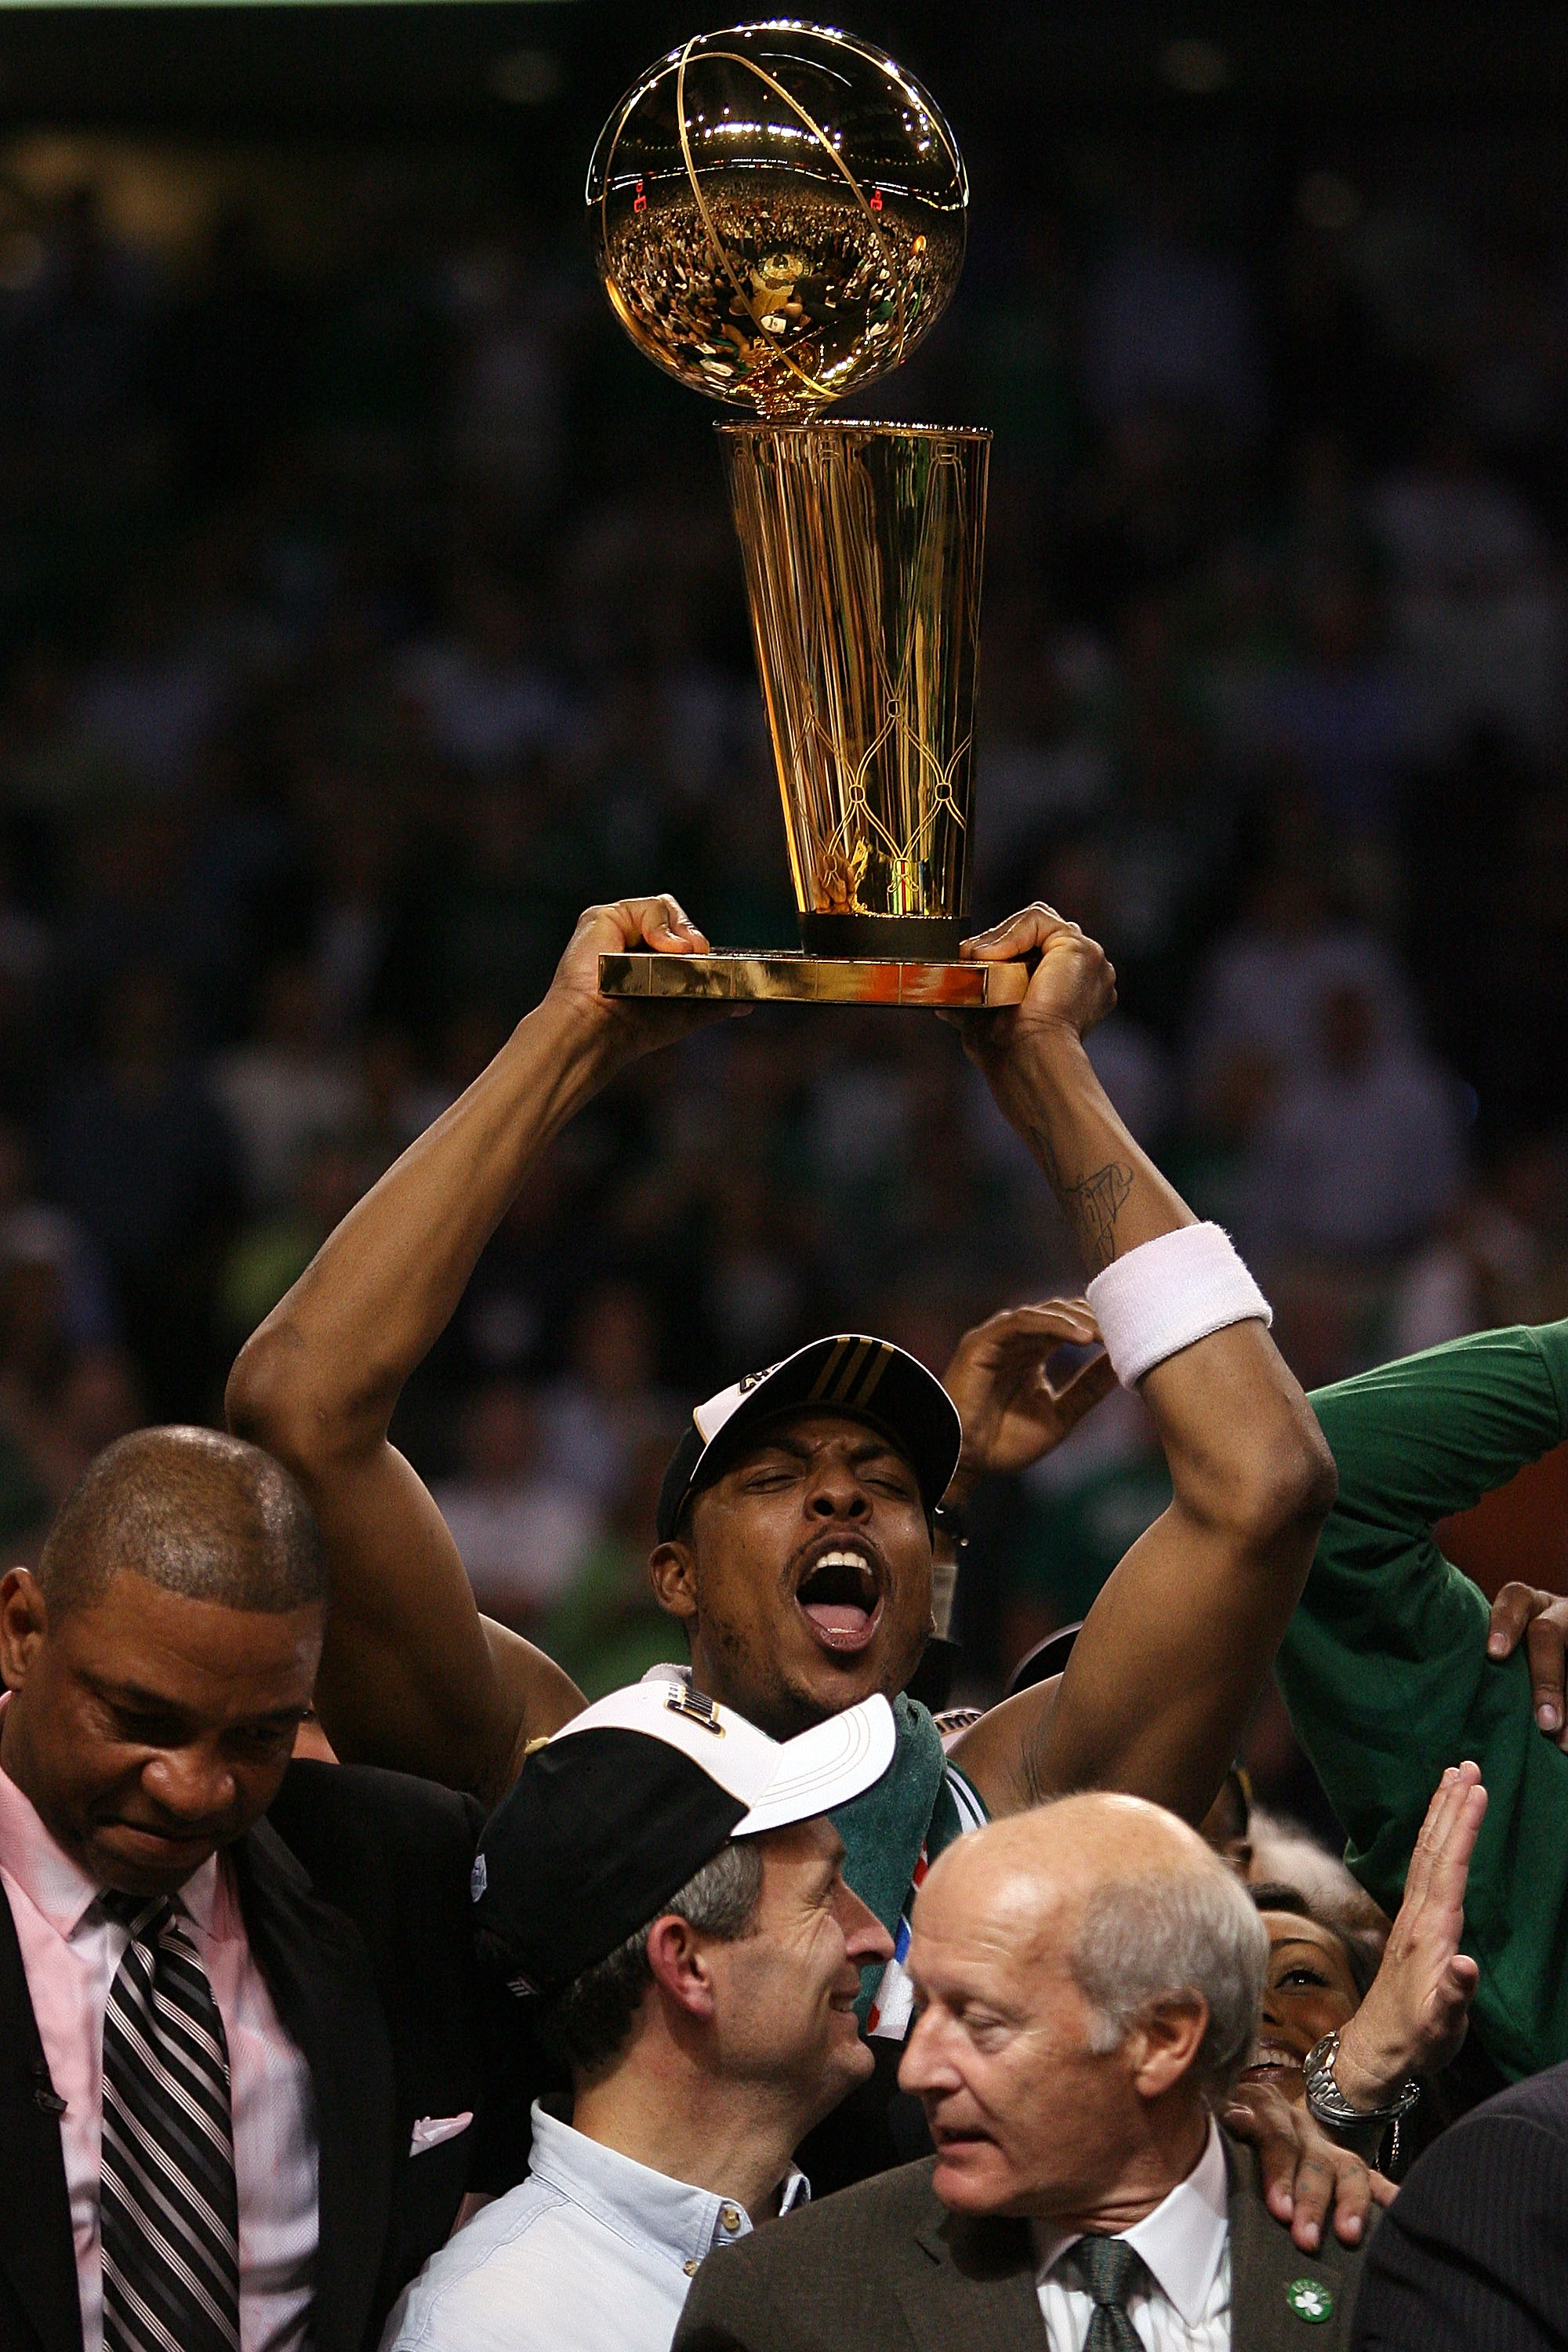 BOSTON - JUNE 17:  Paul Pierce #34 of the Boston Celtics celebrates with the Larry O'Brien Trophy after defeating the Los Angeles Lakers in Game Six of the 2008 NBA Finals on June 17, 2008 at TD Banknorth Garden in Boston, Massachusetts. NOTE TO USER: Use